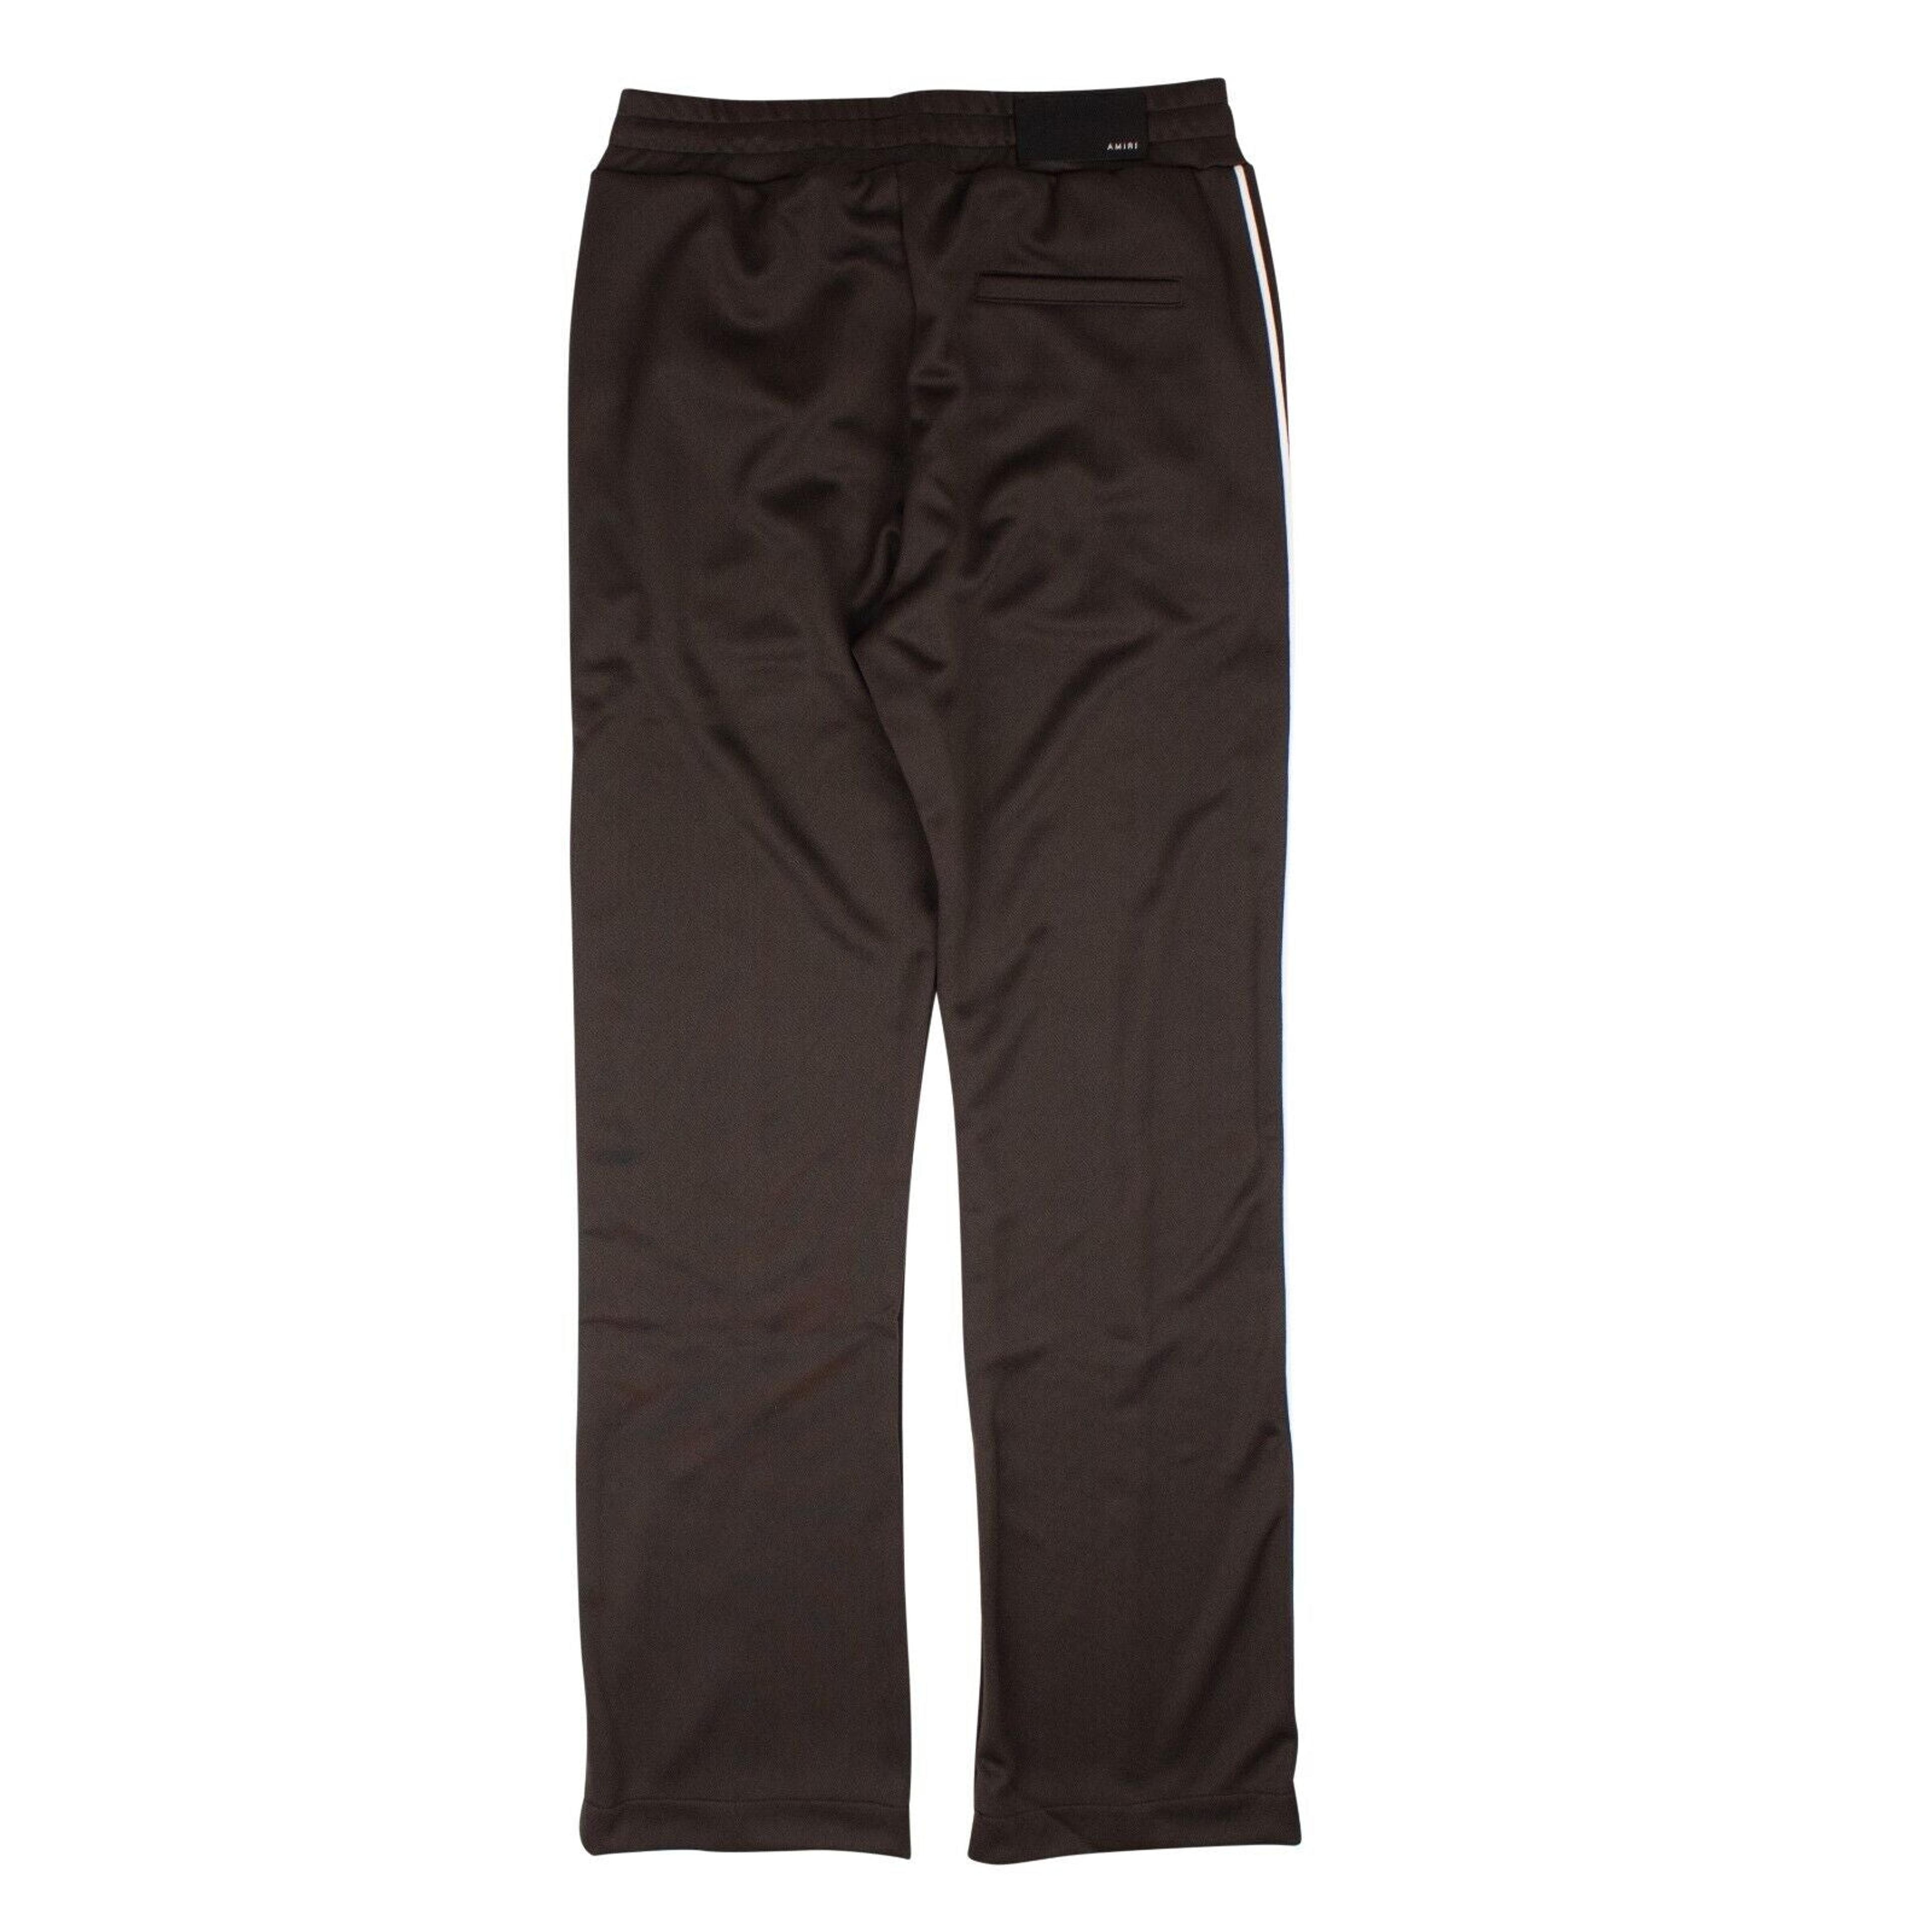 Alternate View 3 of Brown Sheen Track Pants